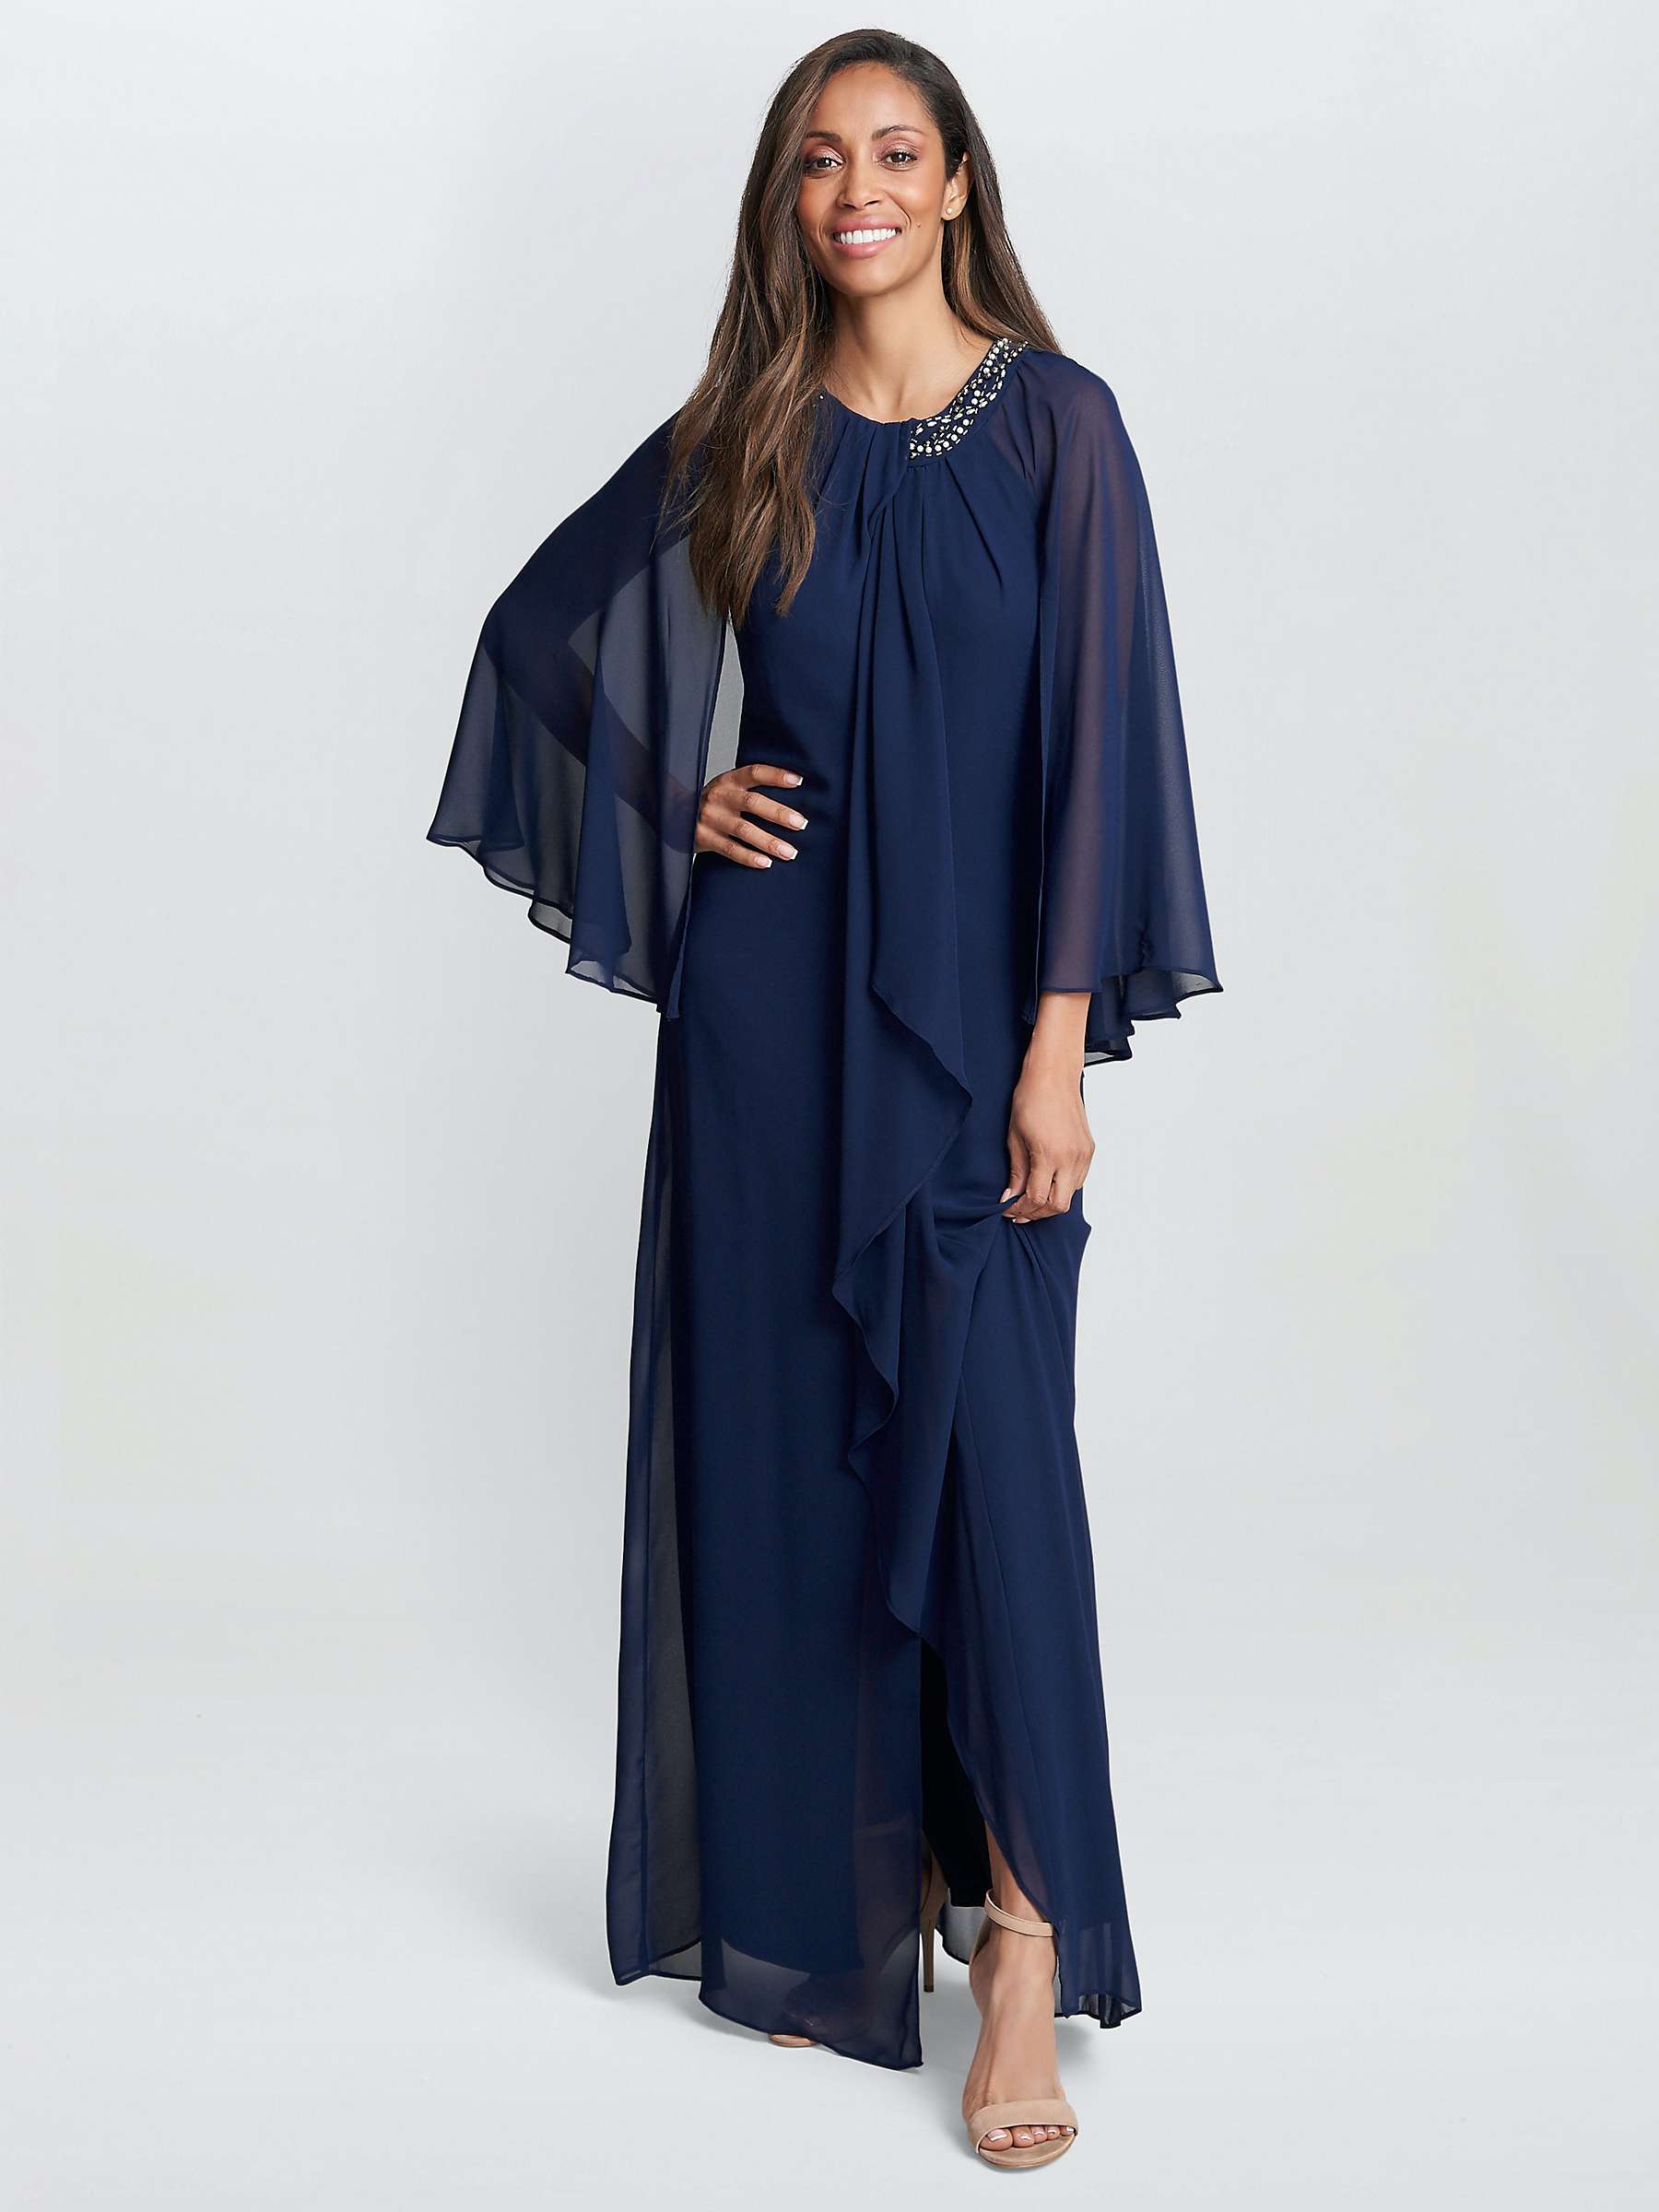 Buy Gina Bacconi Polly Maxi Dress, Navy Online at johnlewis.com